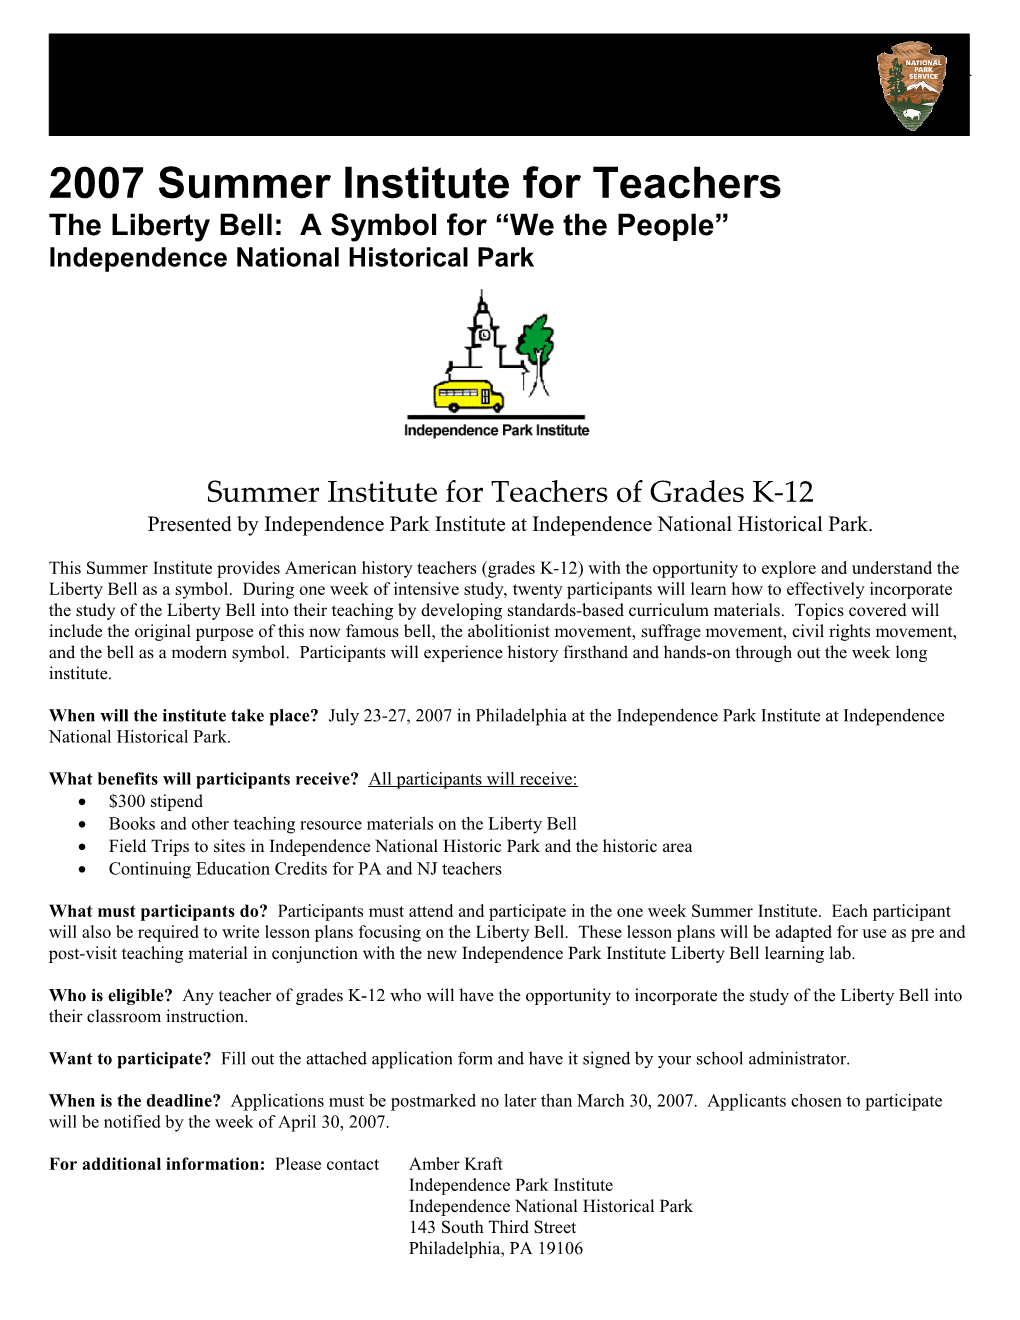 Benjamin Franklin and the American People Summer Institute for Teachers